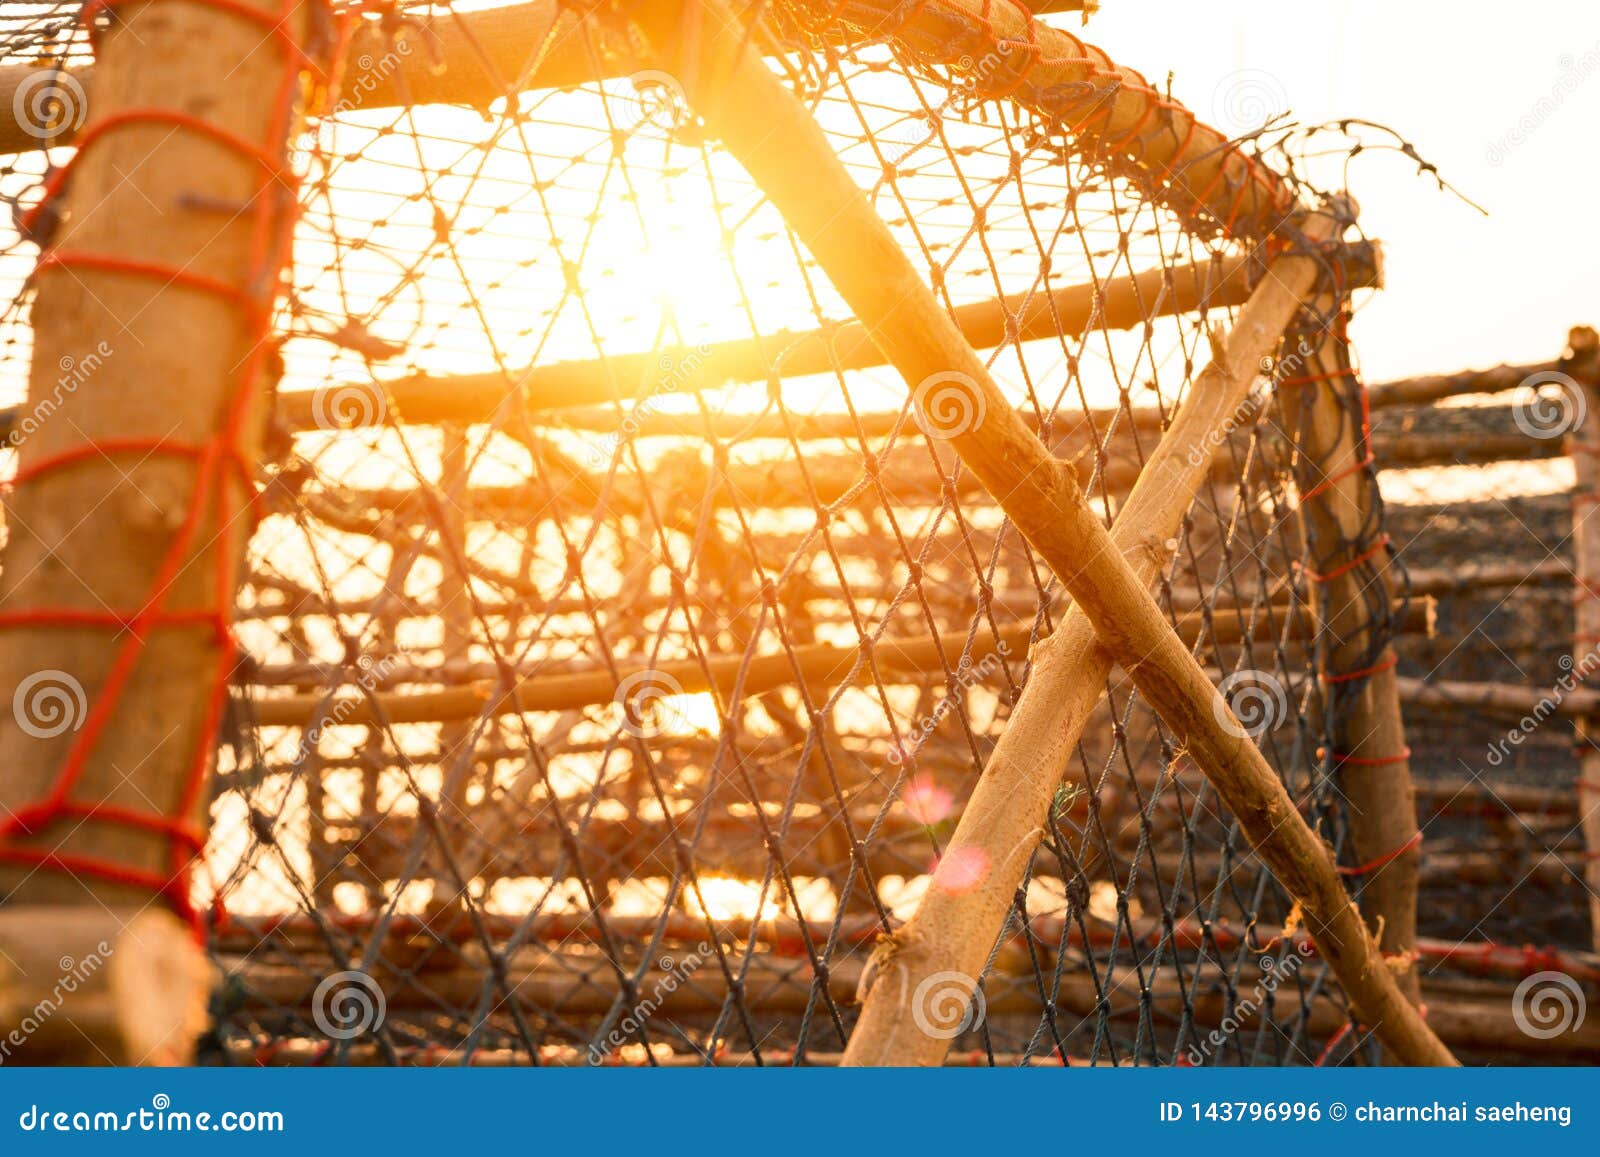 Big Fish Trap on the Quay Near the Sea with Sunset Stock Photo